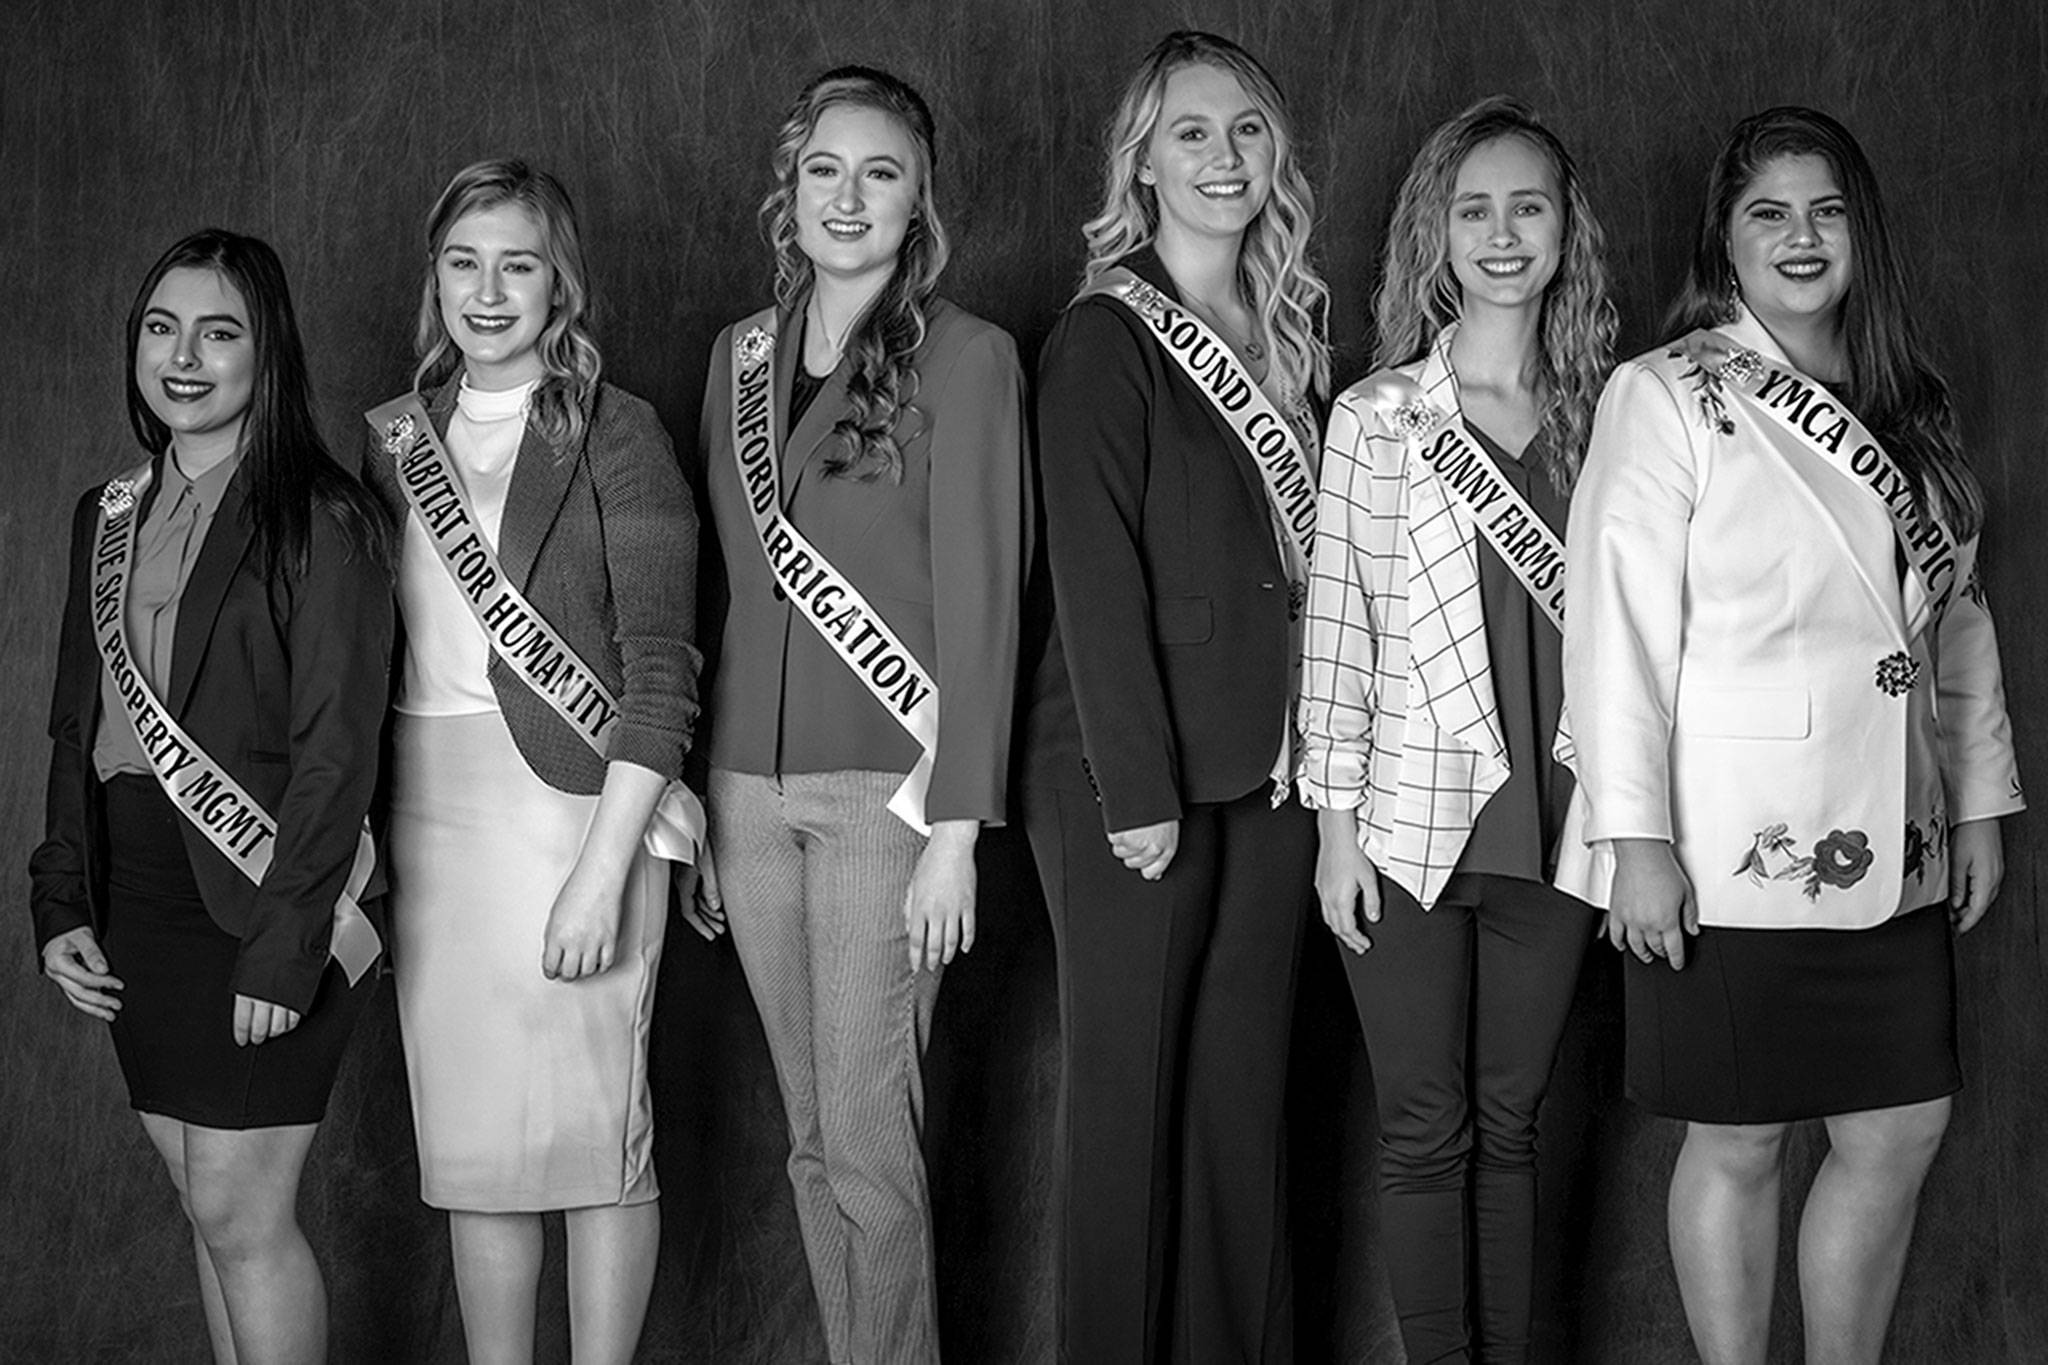 &lt;strong&gt;Keith Ross&lt;/strong&gt;/Keith’s Frame of Mind                                This year’s contestants for the Irrigation Festival Royalty court include, from left, Kjirstin Foresman, Emily Silva, Brianna Cowan, Shelby Wells, Erin Rosengren and Ana Benitez.                                This year’s contestants for the Irrigation Festival Royalty court include, from left, Kjirstin Foresman, Emily Silva, Brianna Cowan, Shelby Wells, Erin Rosengren and Ana Benitez. (Keith Ross /Keith’s Frame of Mind)